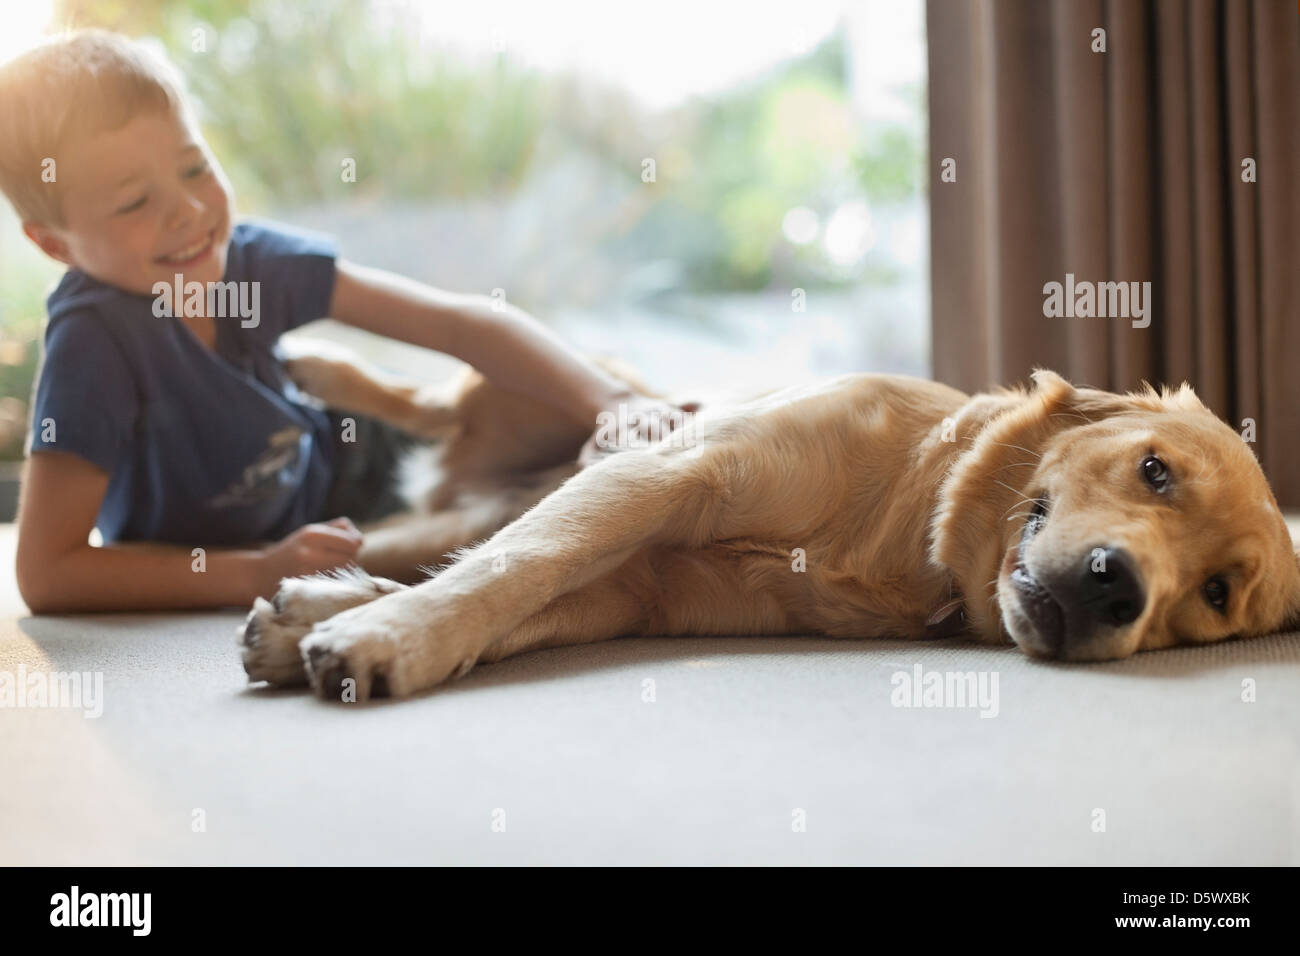 Smiling boy petting dog in living room Banque D'Images